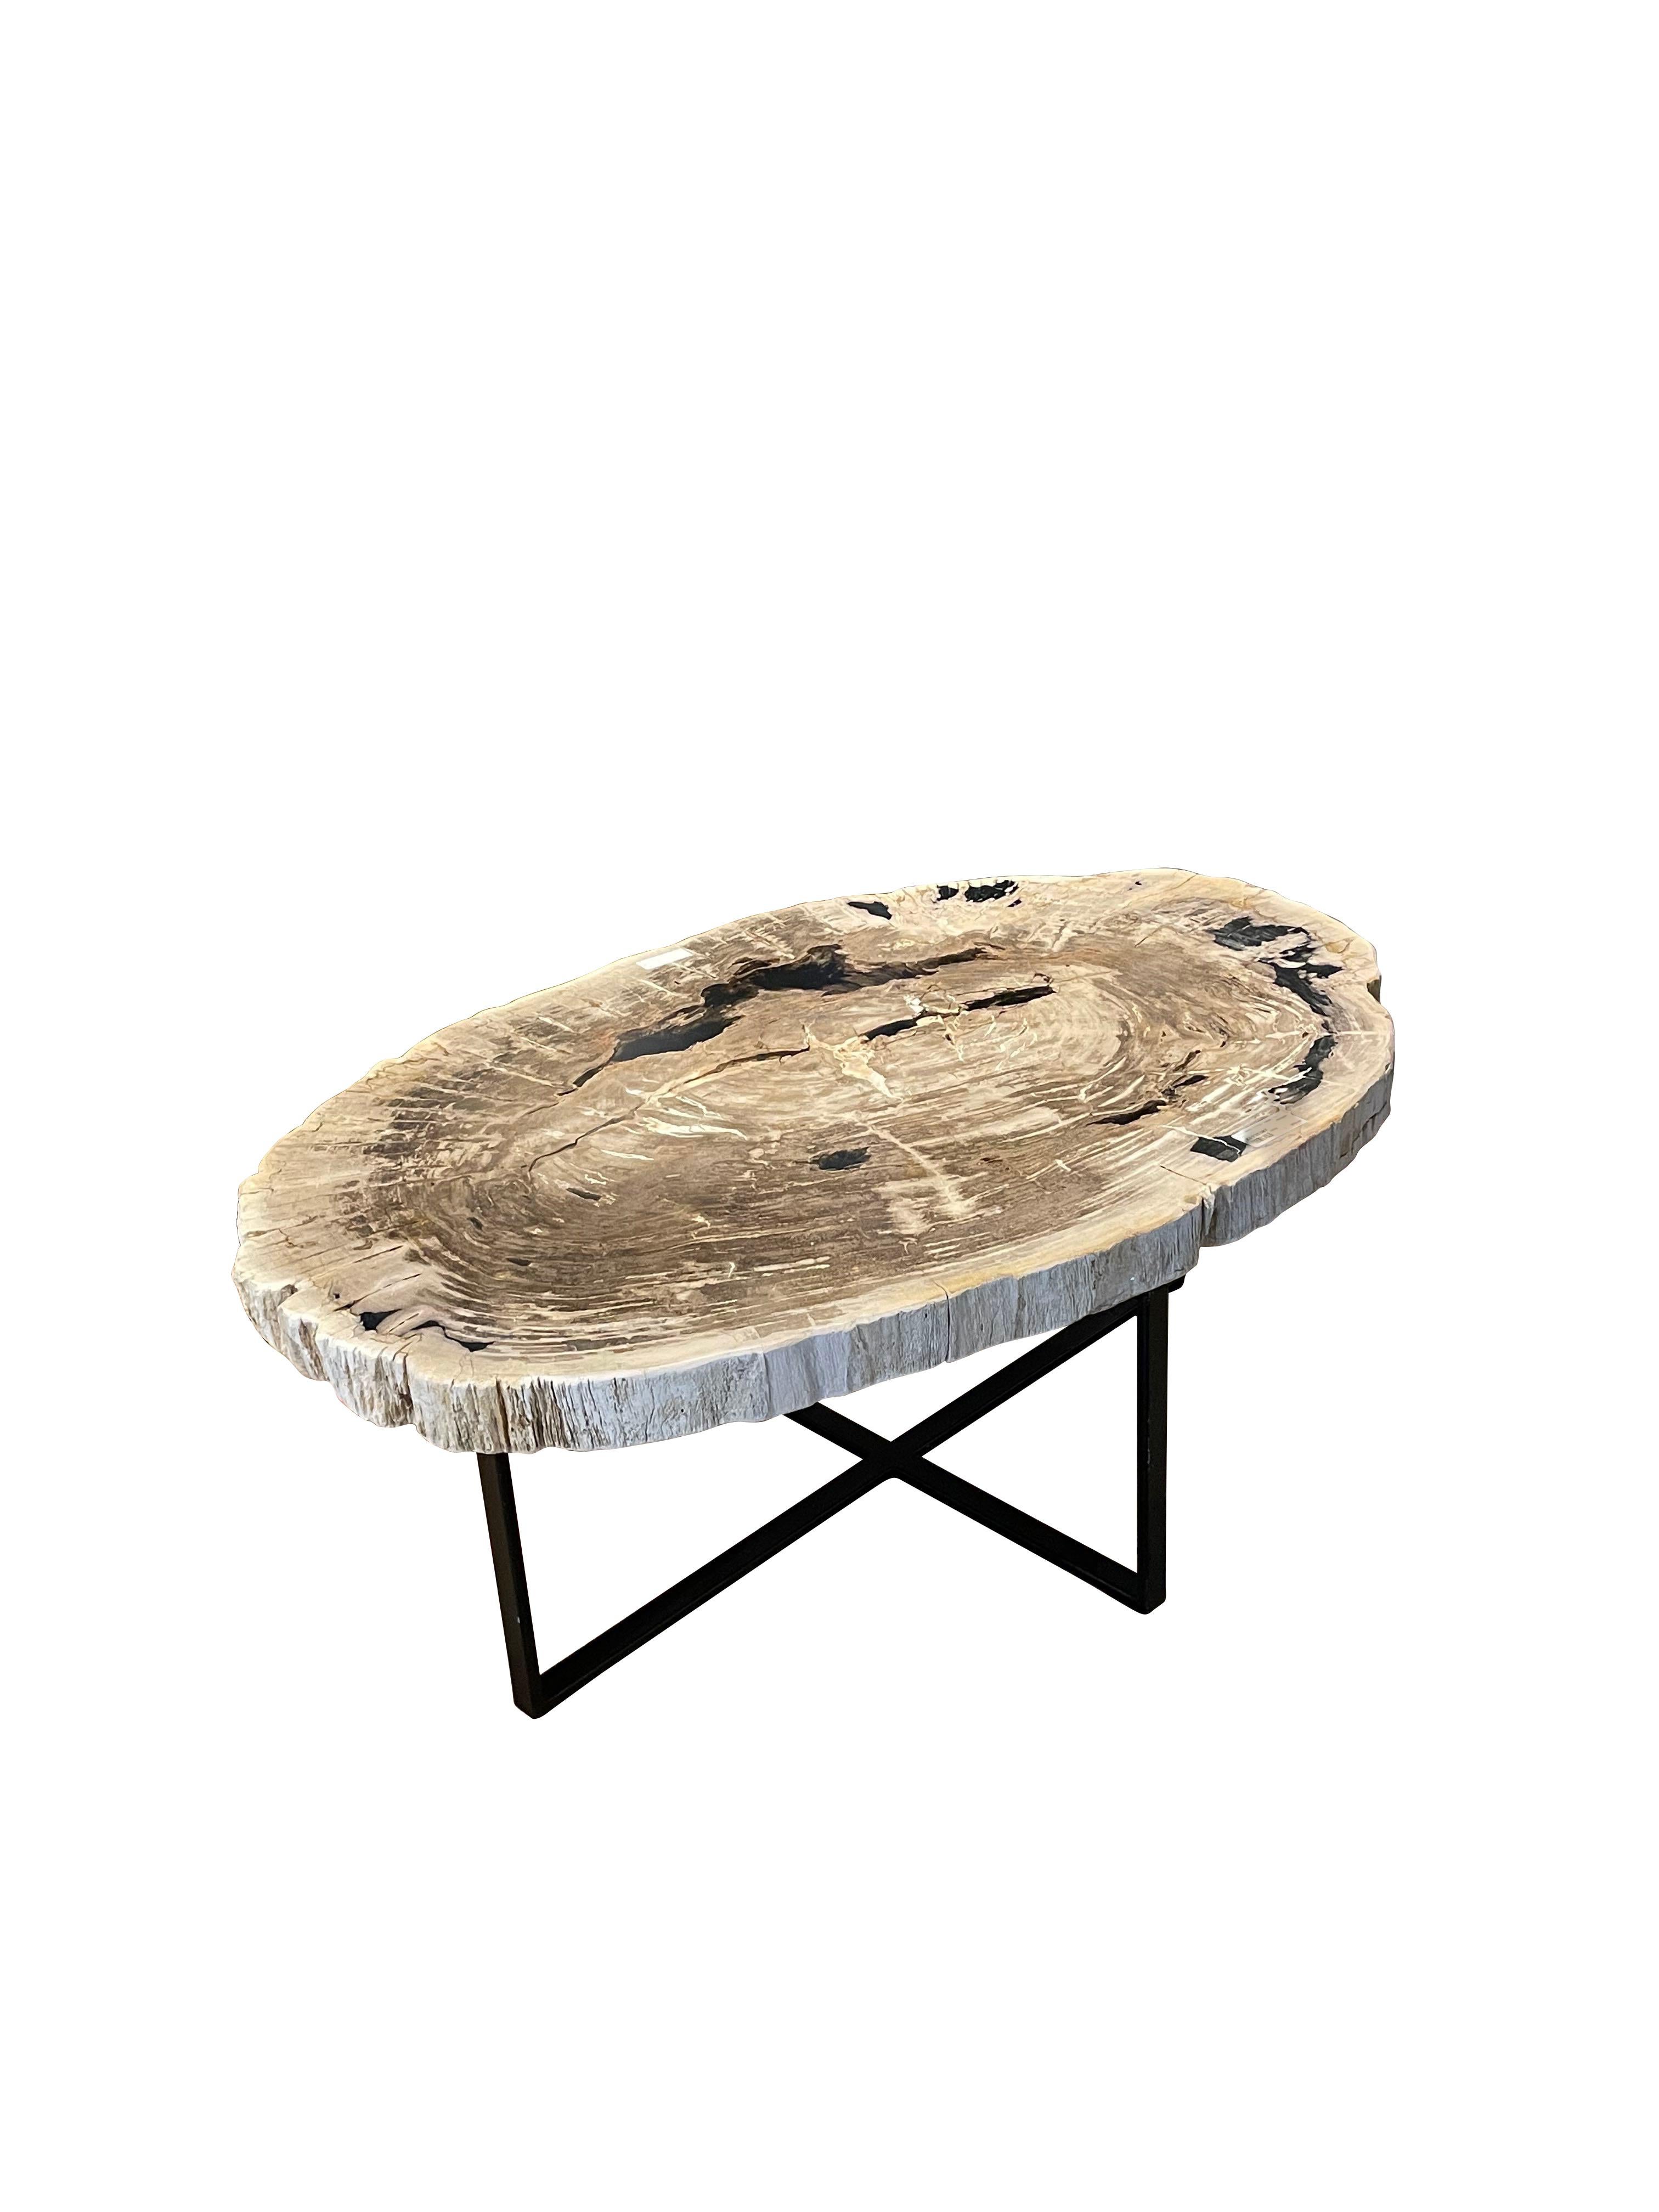 Contemporary Indonesian large thick slice of petrified wood coffee table.
Supported on steel base.
Polished taupe, cream and black top.
Sides of thick slice top are cream with a textured finish.
ARRIVING APRIL.